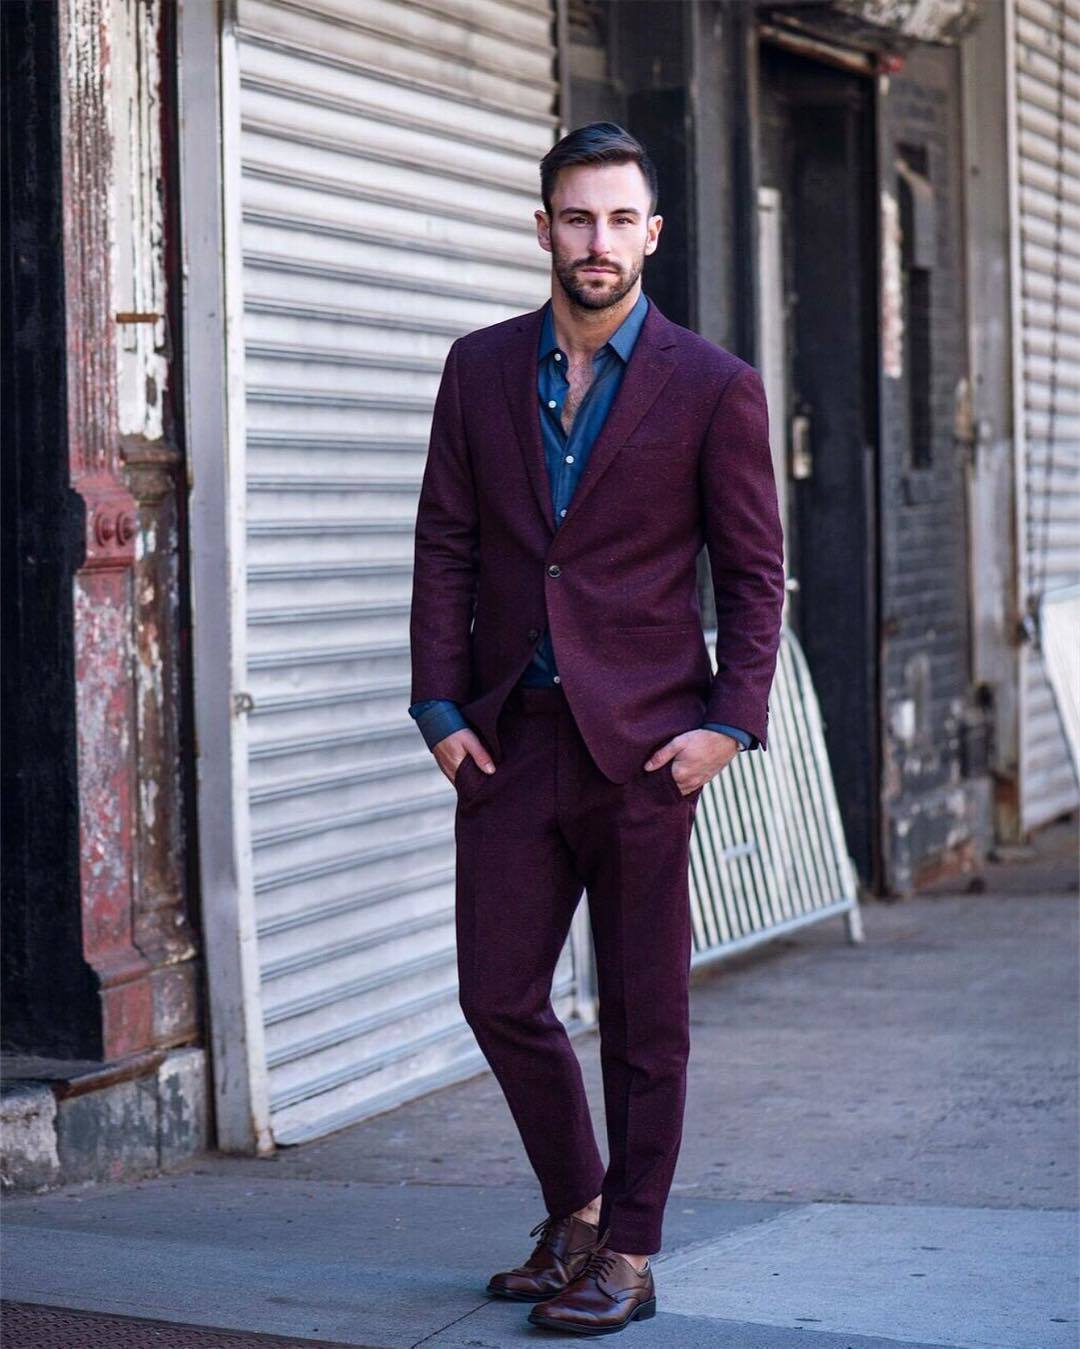 Which colour shoes should I wear with wine coloured suit? - Quora